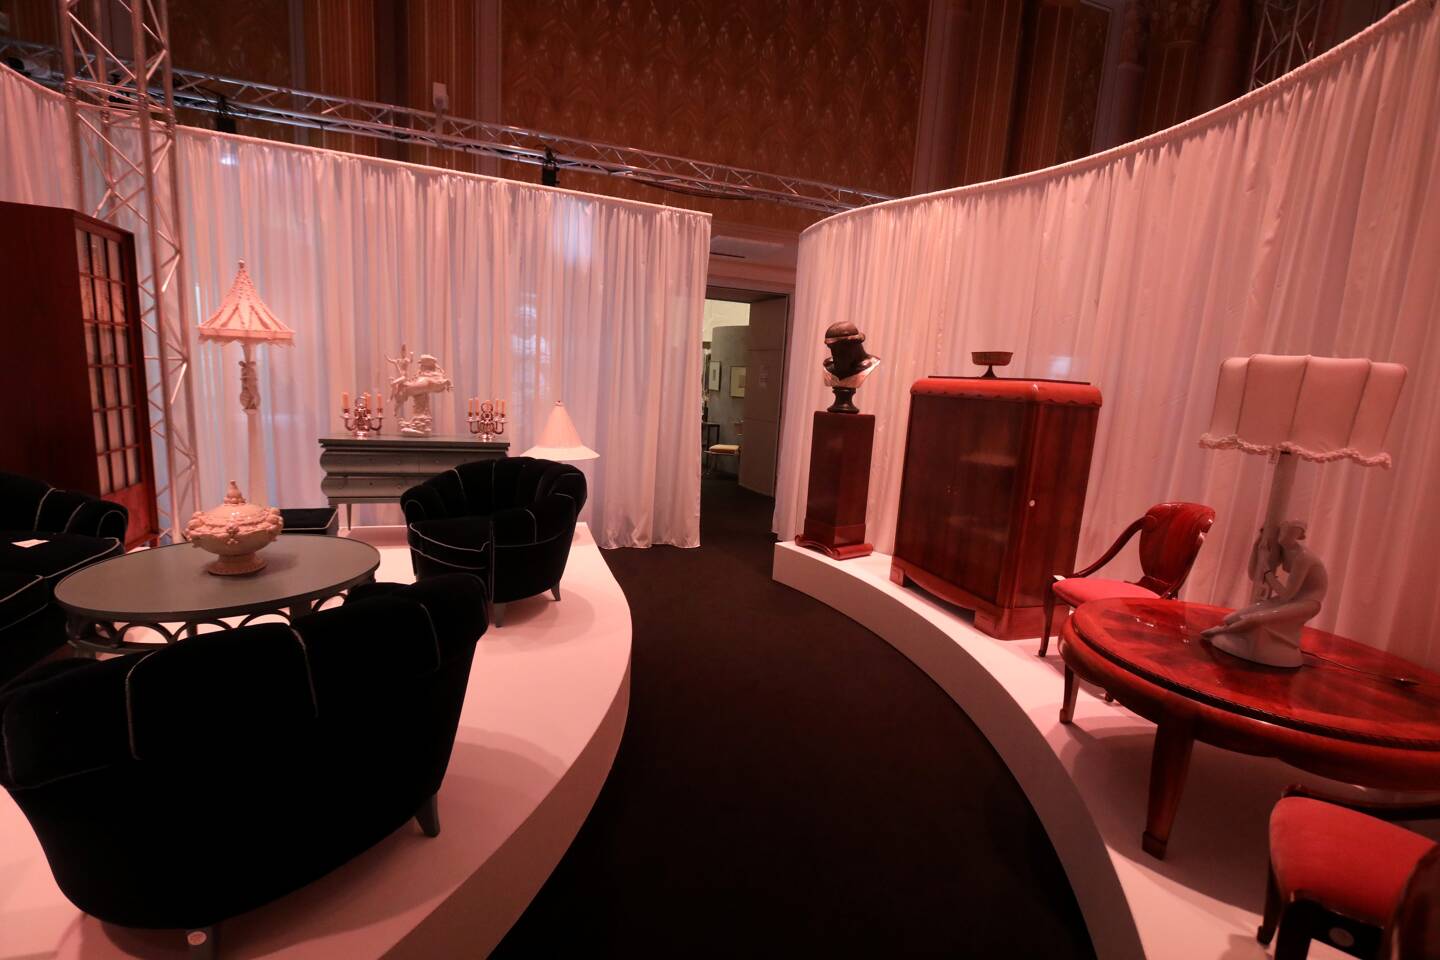 The decor of the exhibition echoes the spirit of Karl Lagerfeld's homes.